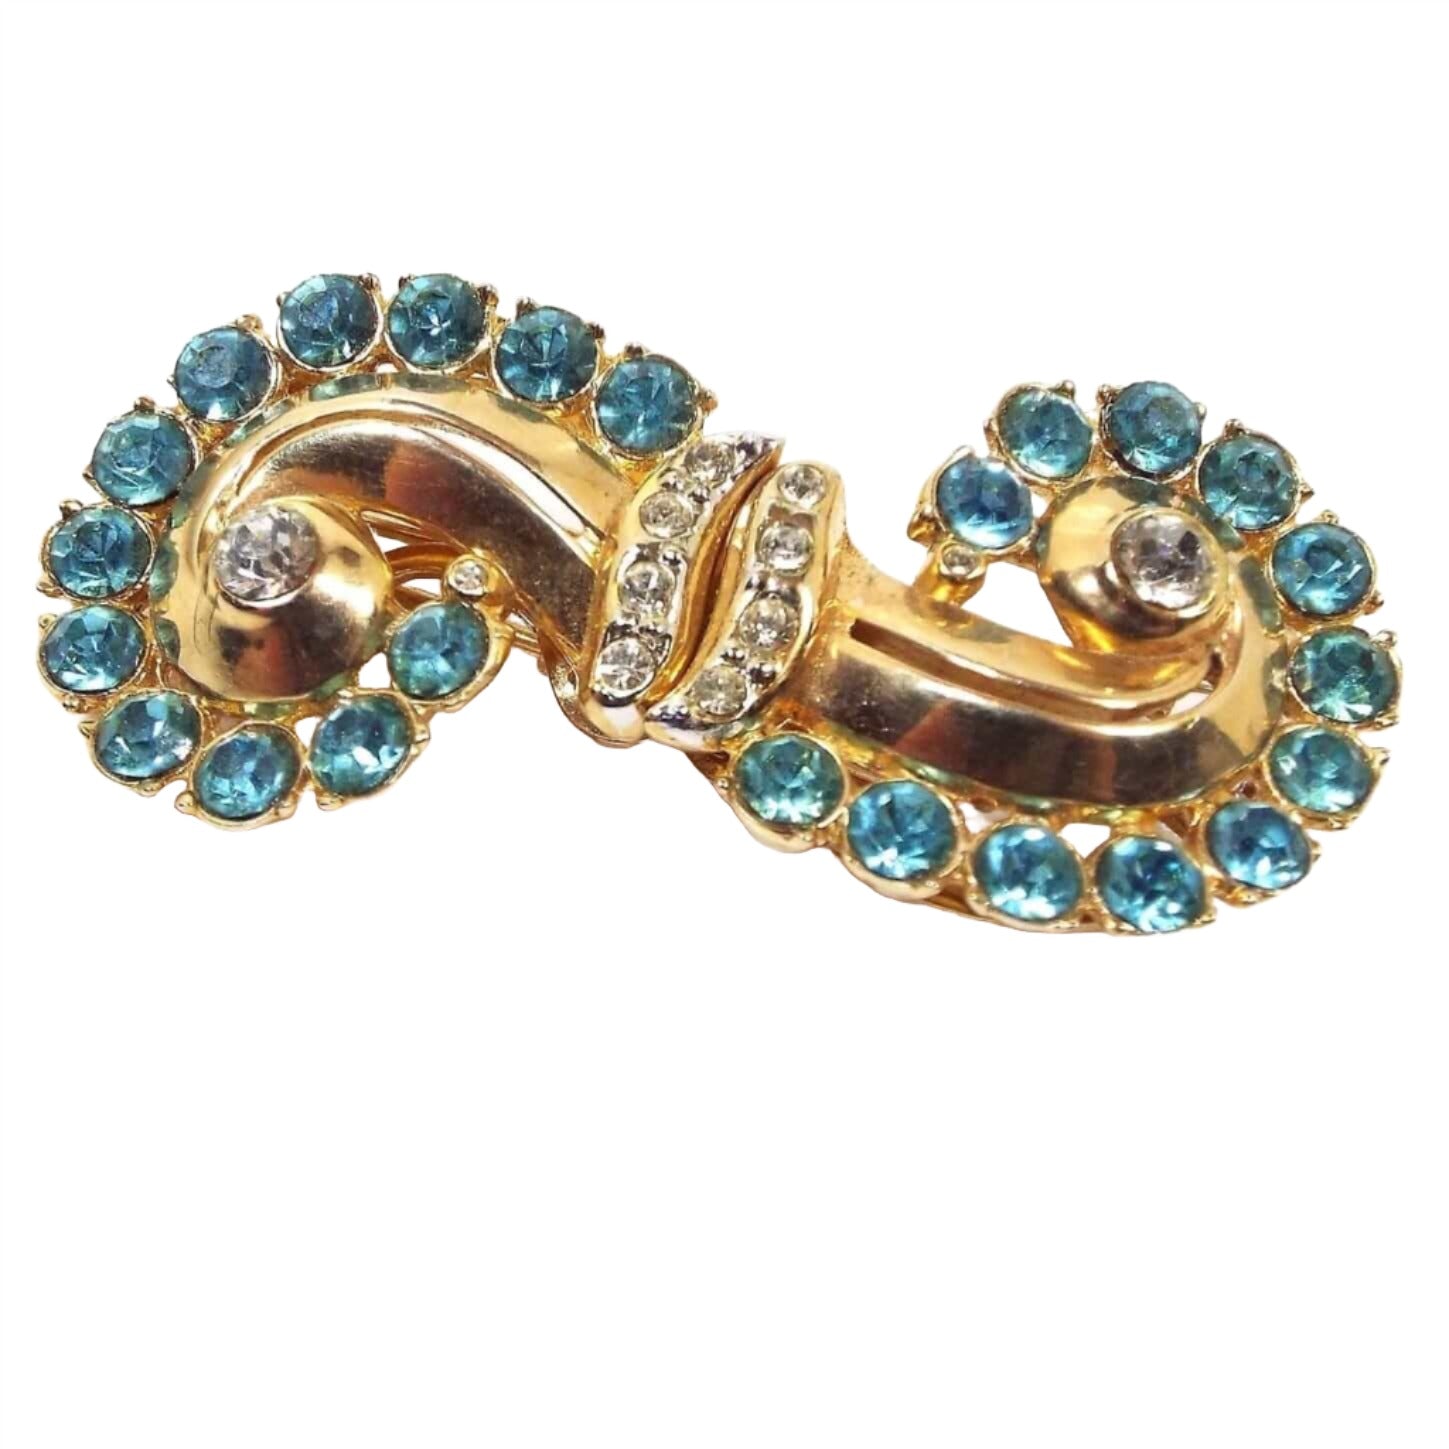 Front view of the 1930's Art Deco vintage Coro Duette Brooch pin fur clip combo. The metal is gold tone in color. Each side is curved around and back inwards with each side curving in a different direction for an S like shape. The outer edge has round blue rhinestones with a clear rhinestone in the middle. There are two bands of clear rhinestones going across the middle of the brooch. The stones are affixed to the brooch with adhesive and small bump style prongs.